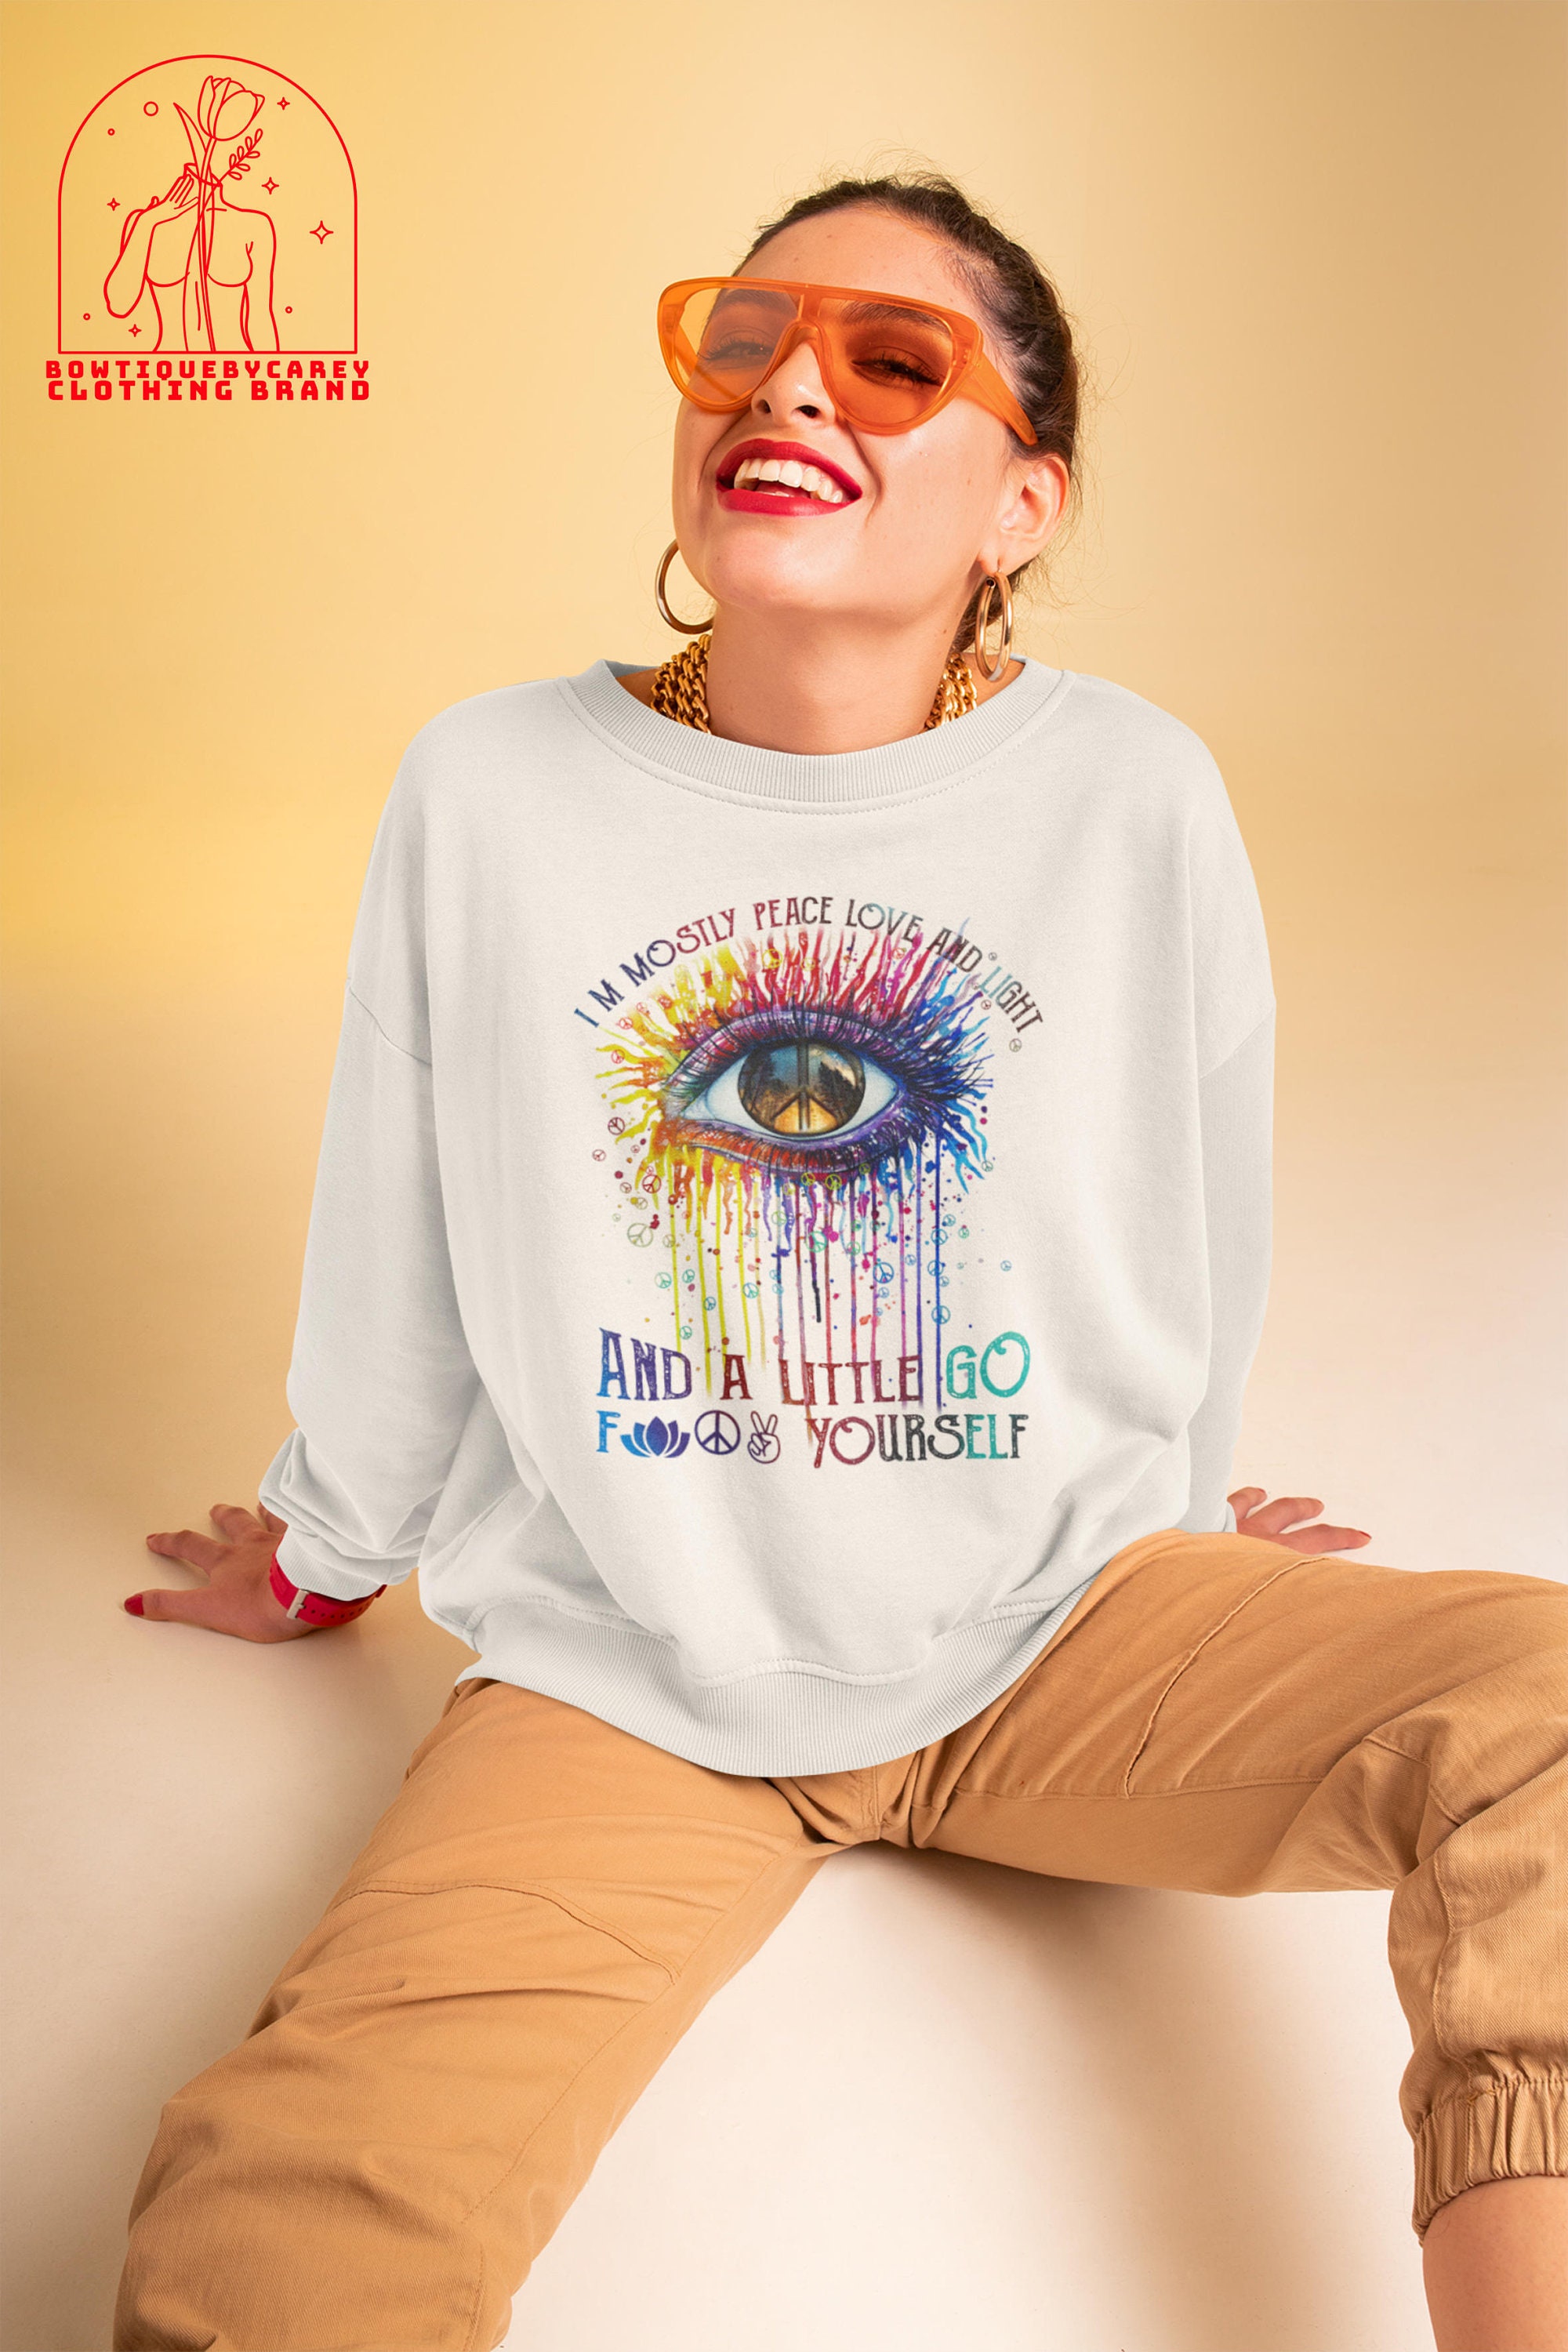 I’m Mostly Peace Love And Light And A Little Go Fuck Yourself Color Eye Peace Unisex T-Shirt